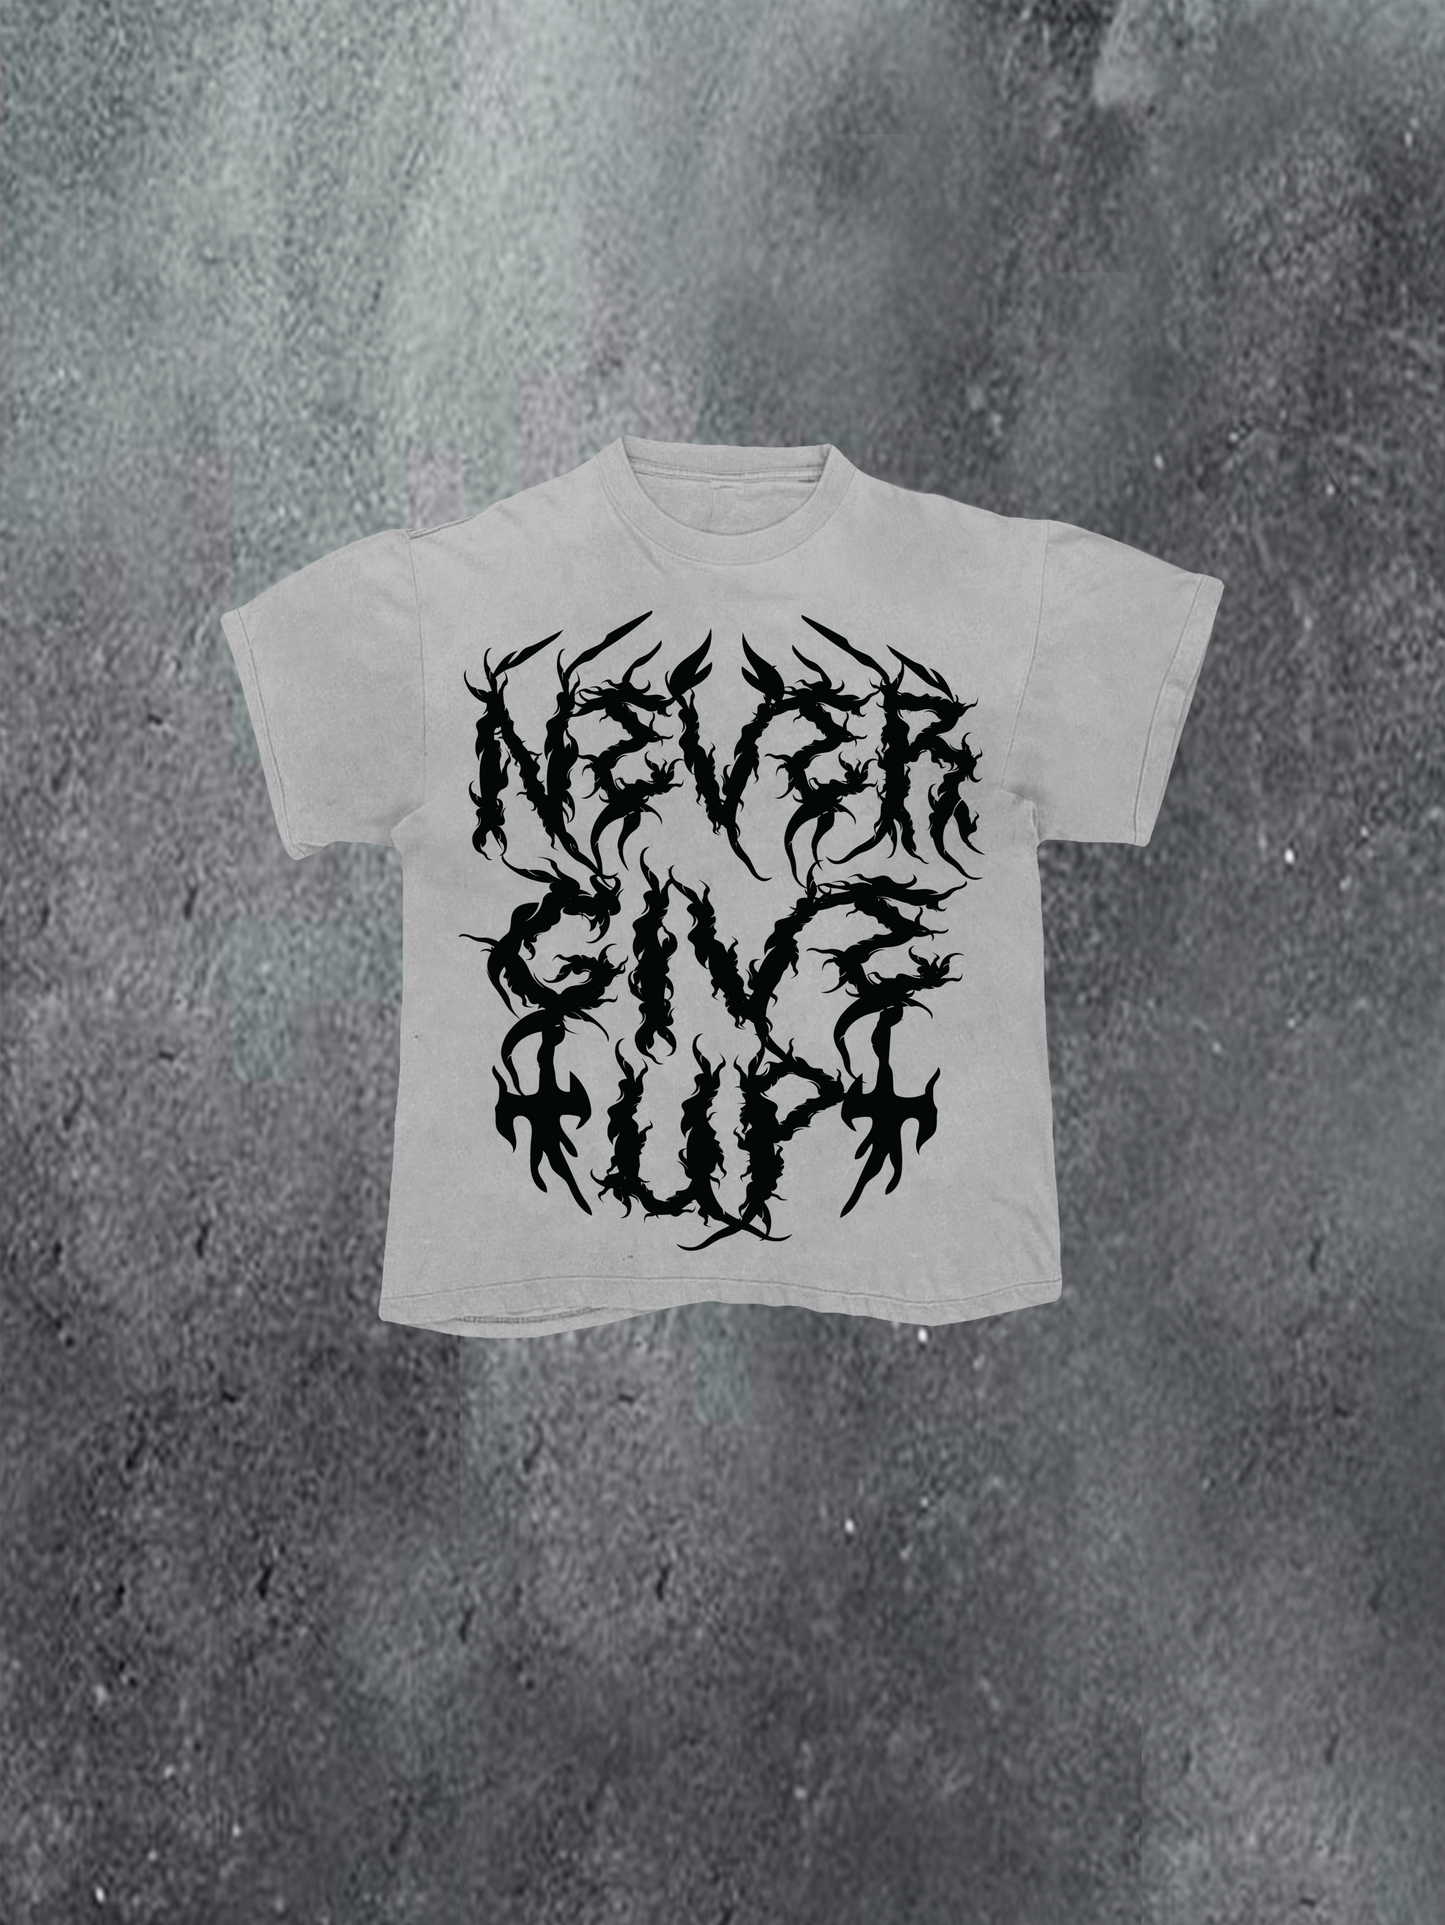 Never Give Up Tee